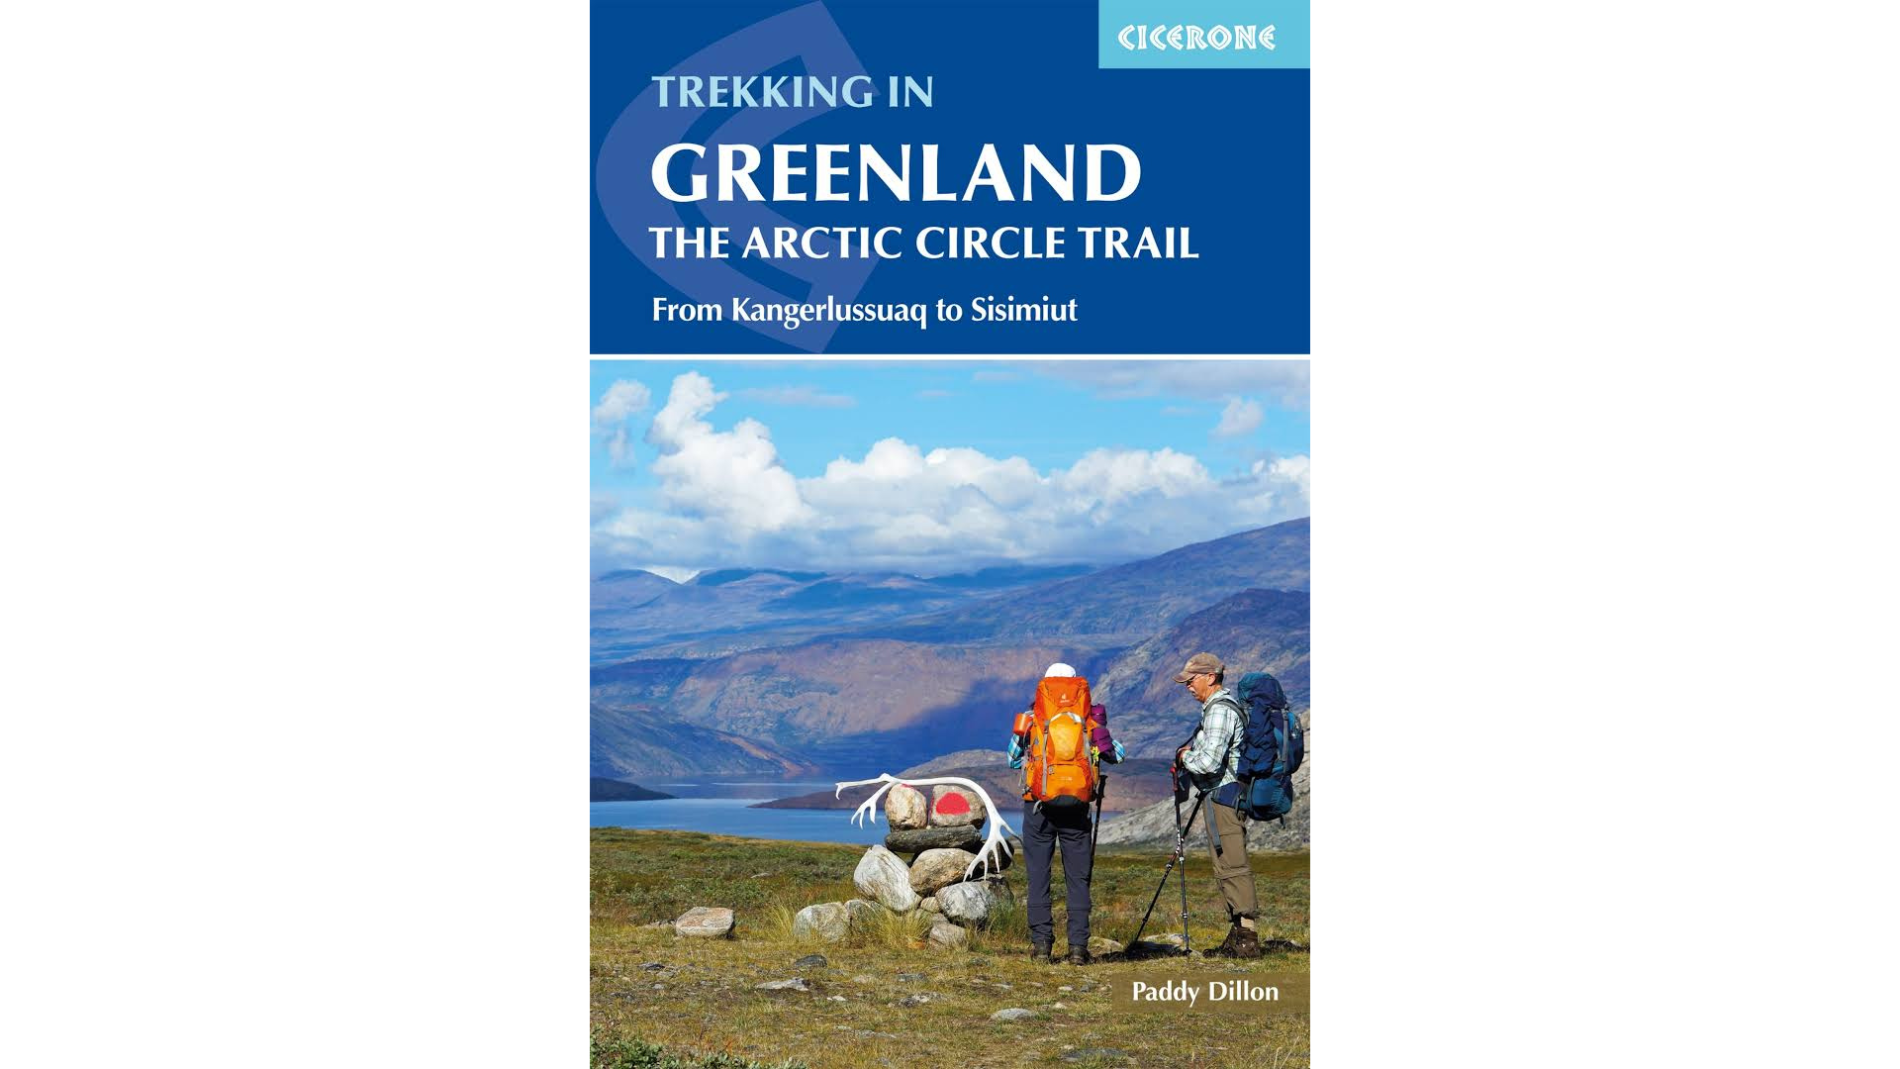 Front cover of Paddy Dillon's trail guide for navigating the Arctic Circle Trail